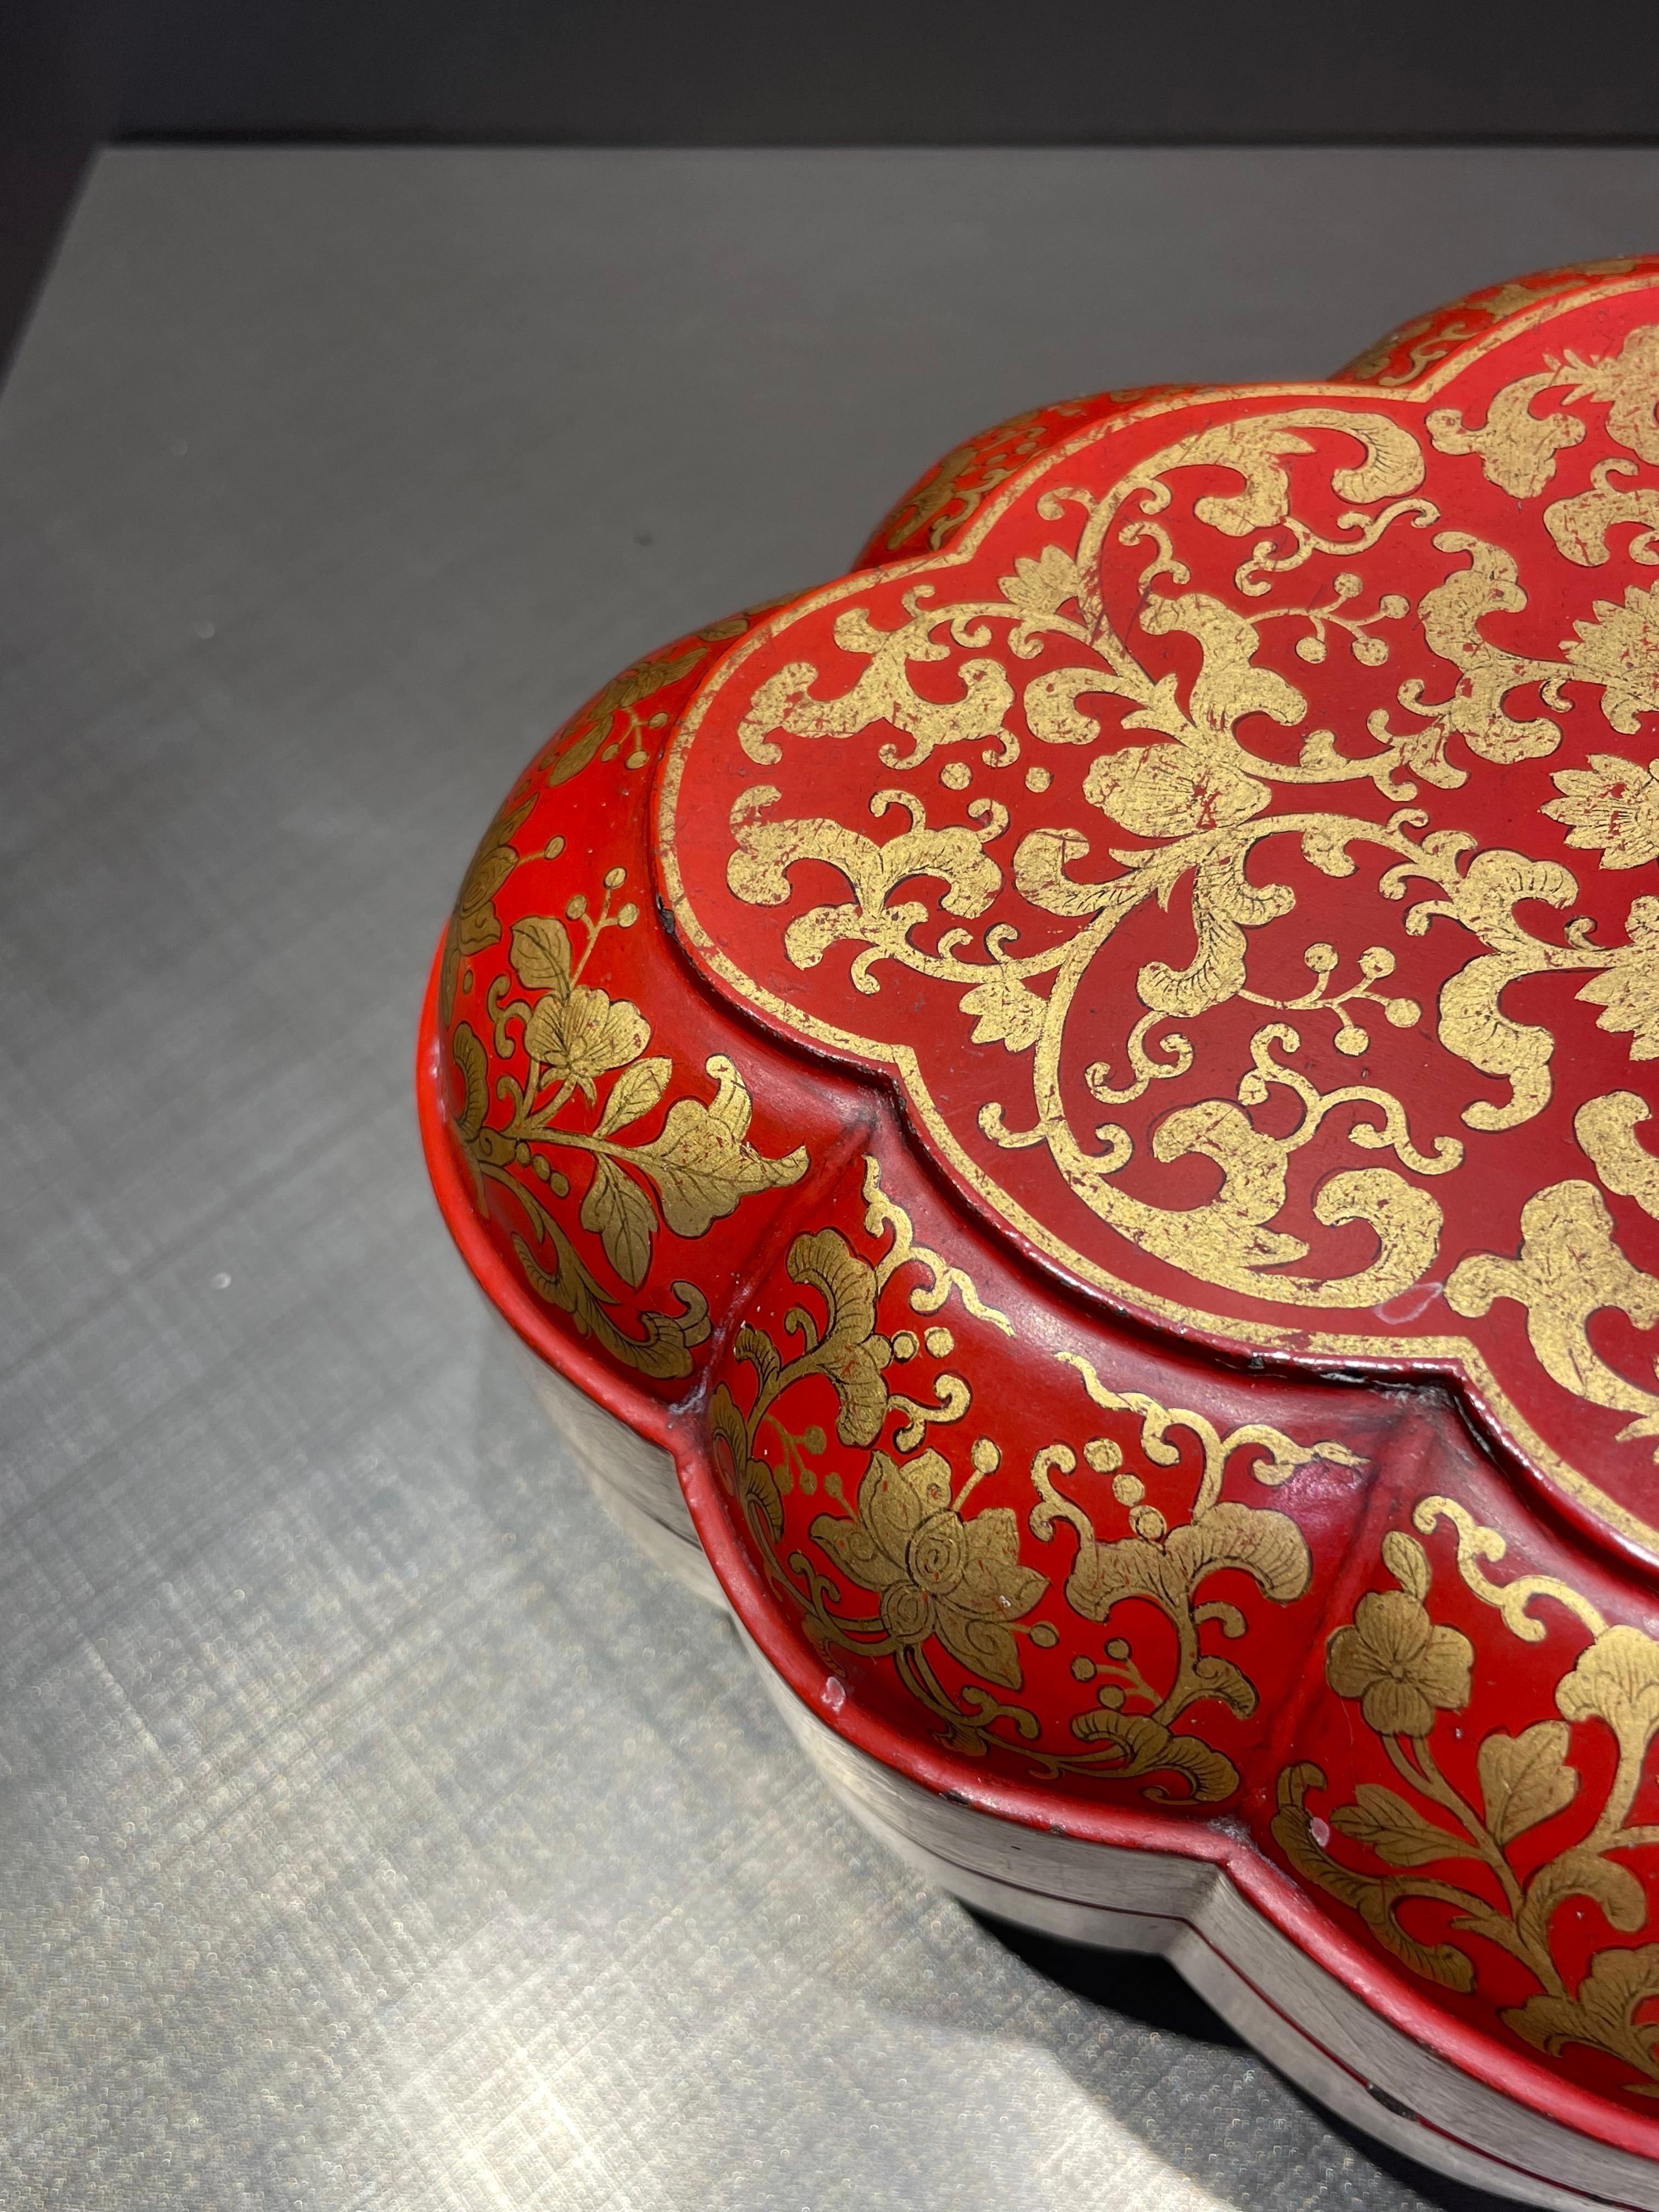 This gorgeous box is beautifully decorated with delicate gold gilt on a bright vermilion base. Signed Qianlong year.